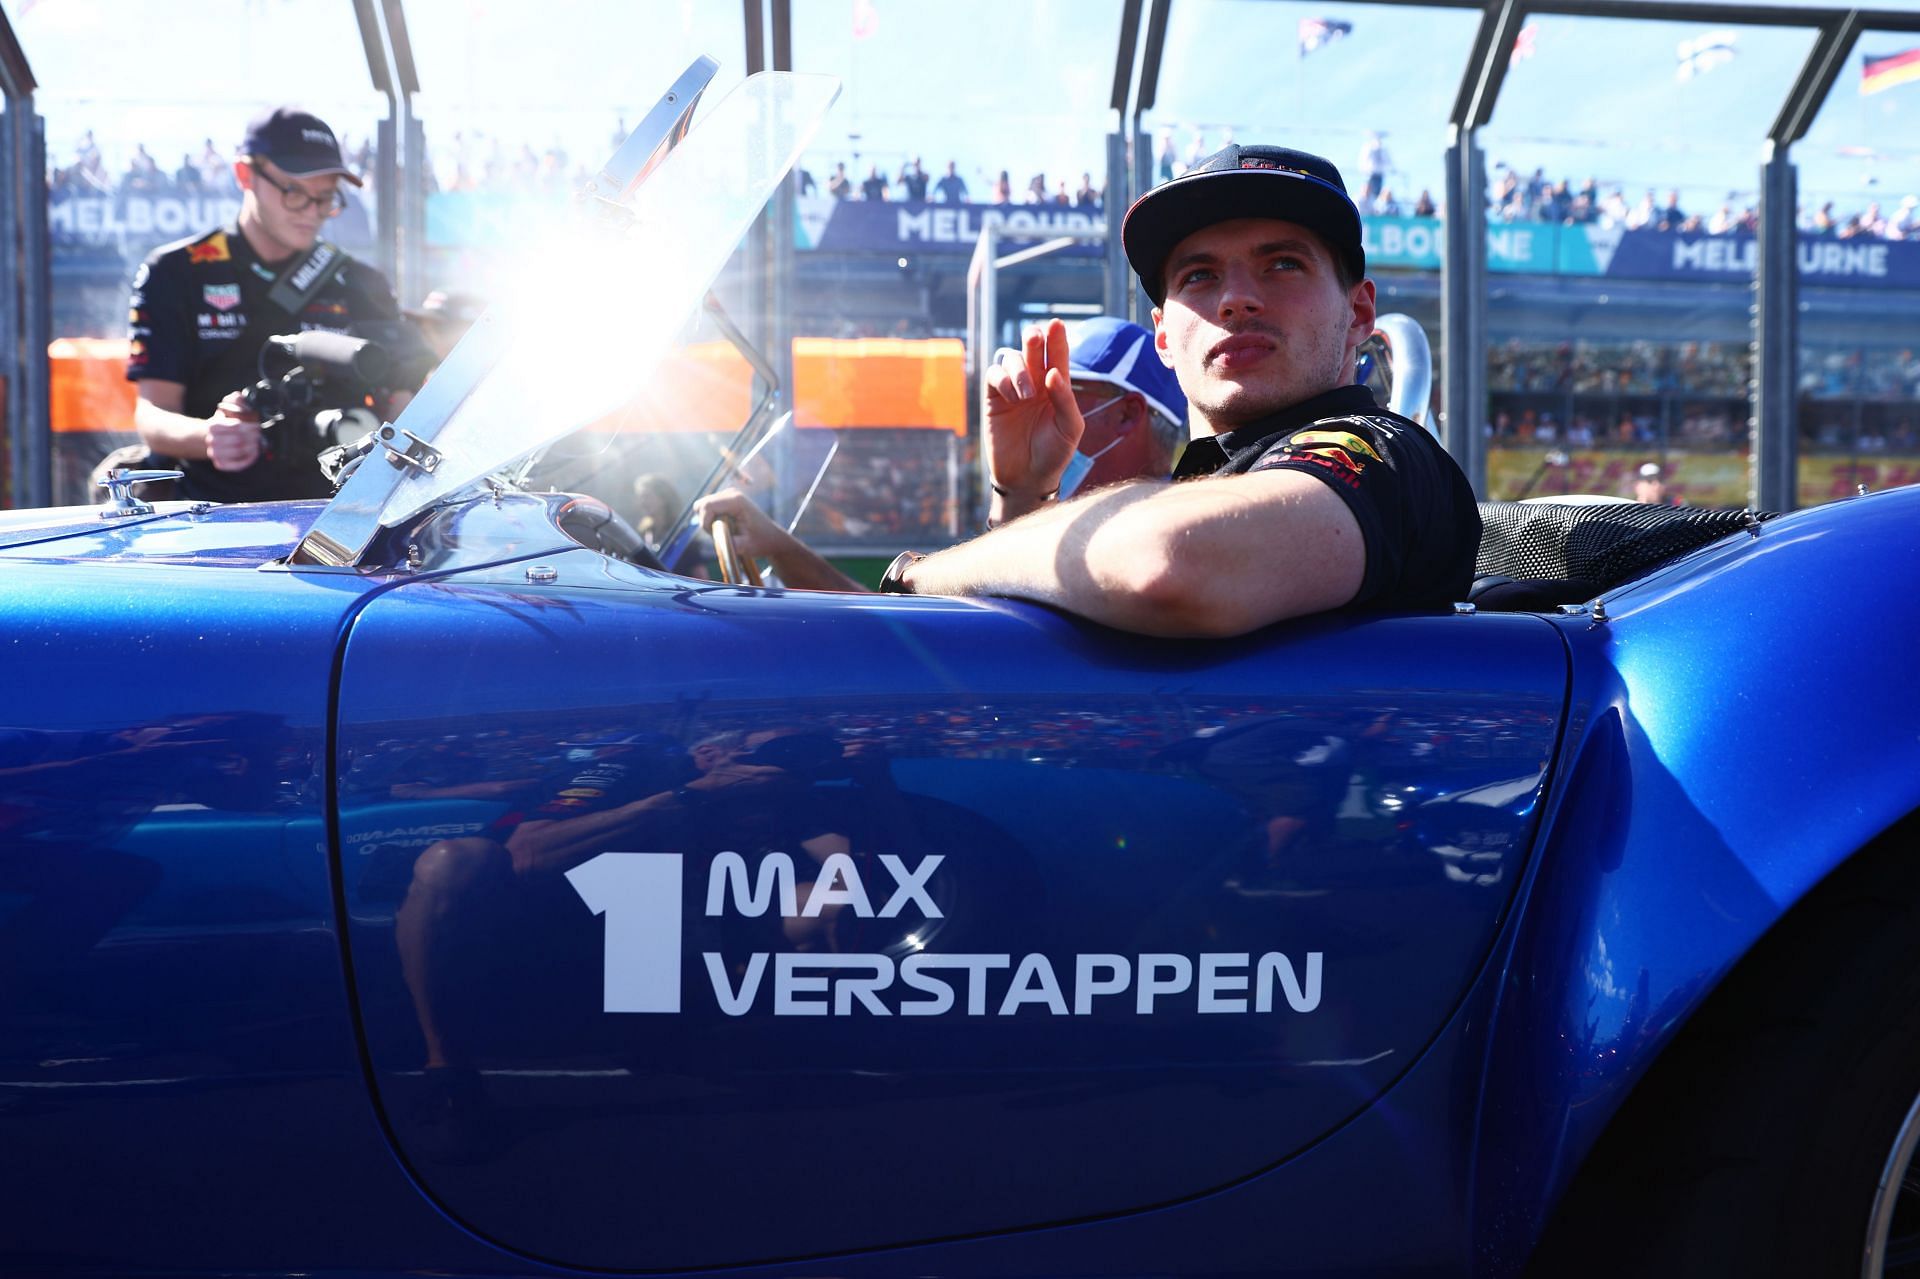 Max Verstappen has launched his racing team that will help racers in both the real and the virtual world